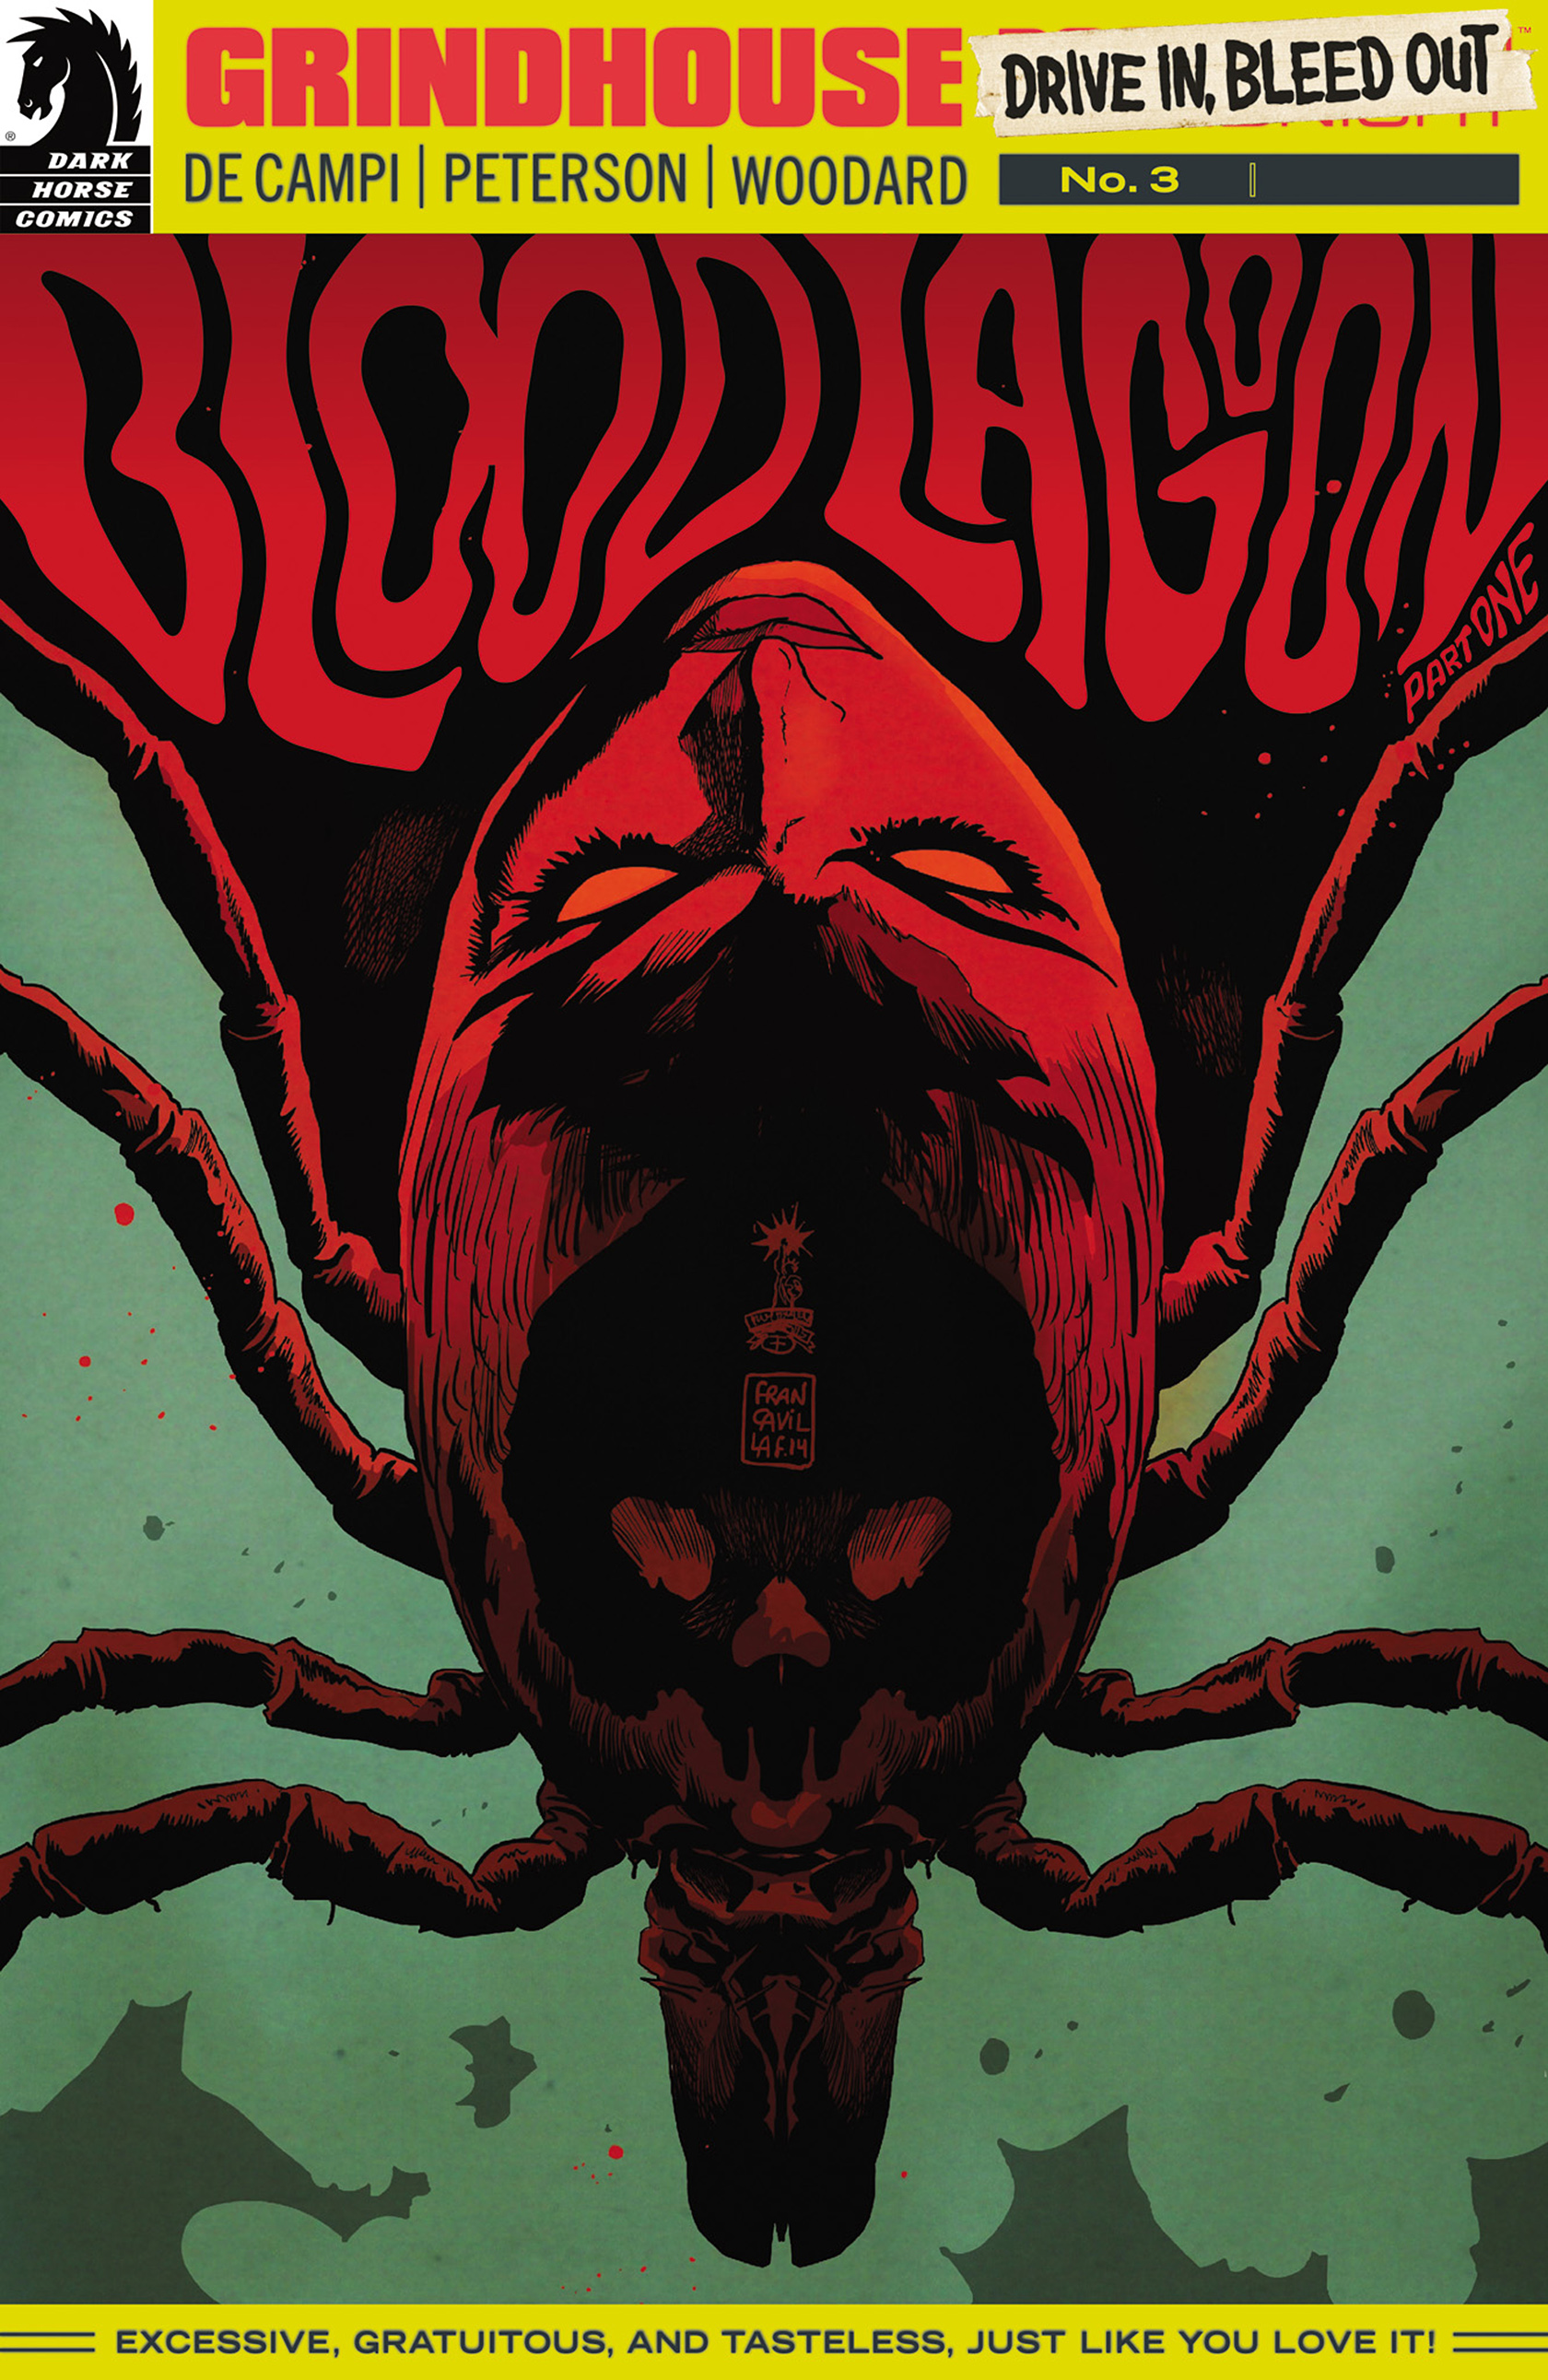 Read online Grindhouse: Drive In, Bleed Out comic -  Issue #3 - 1